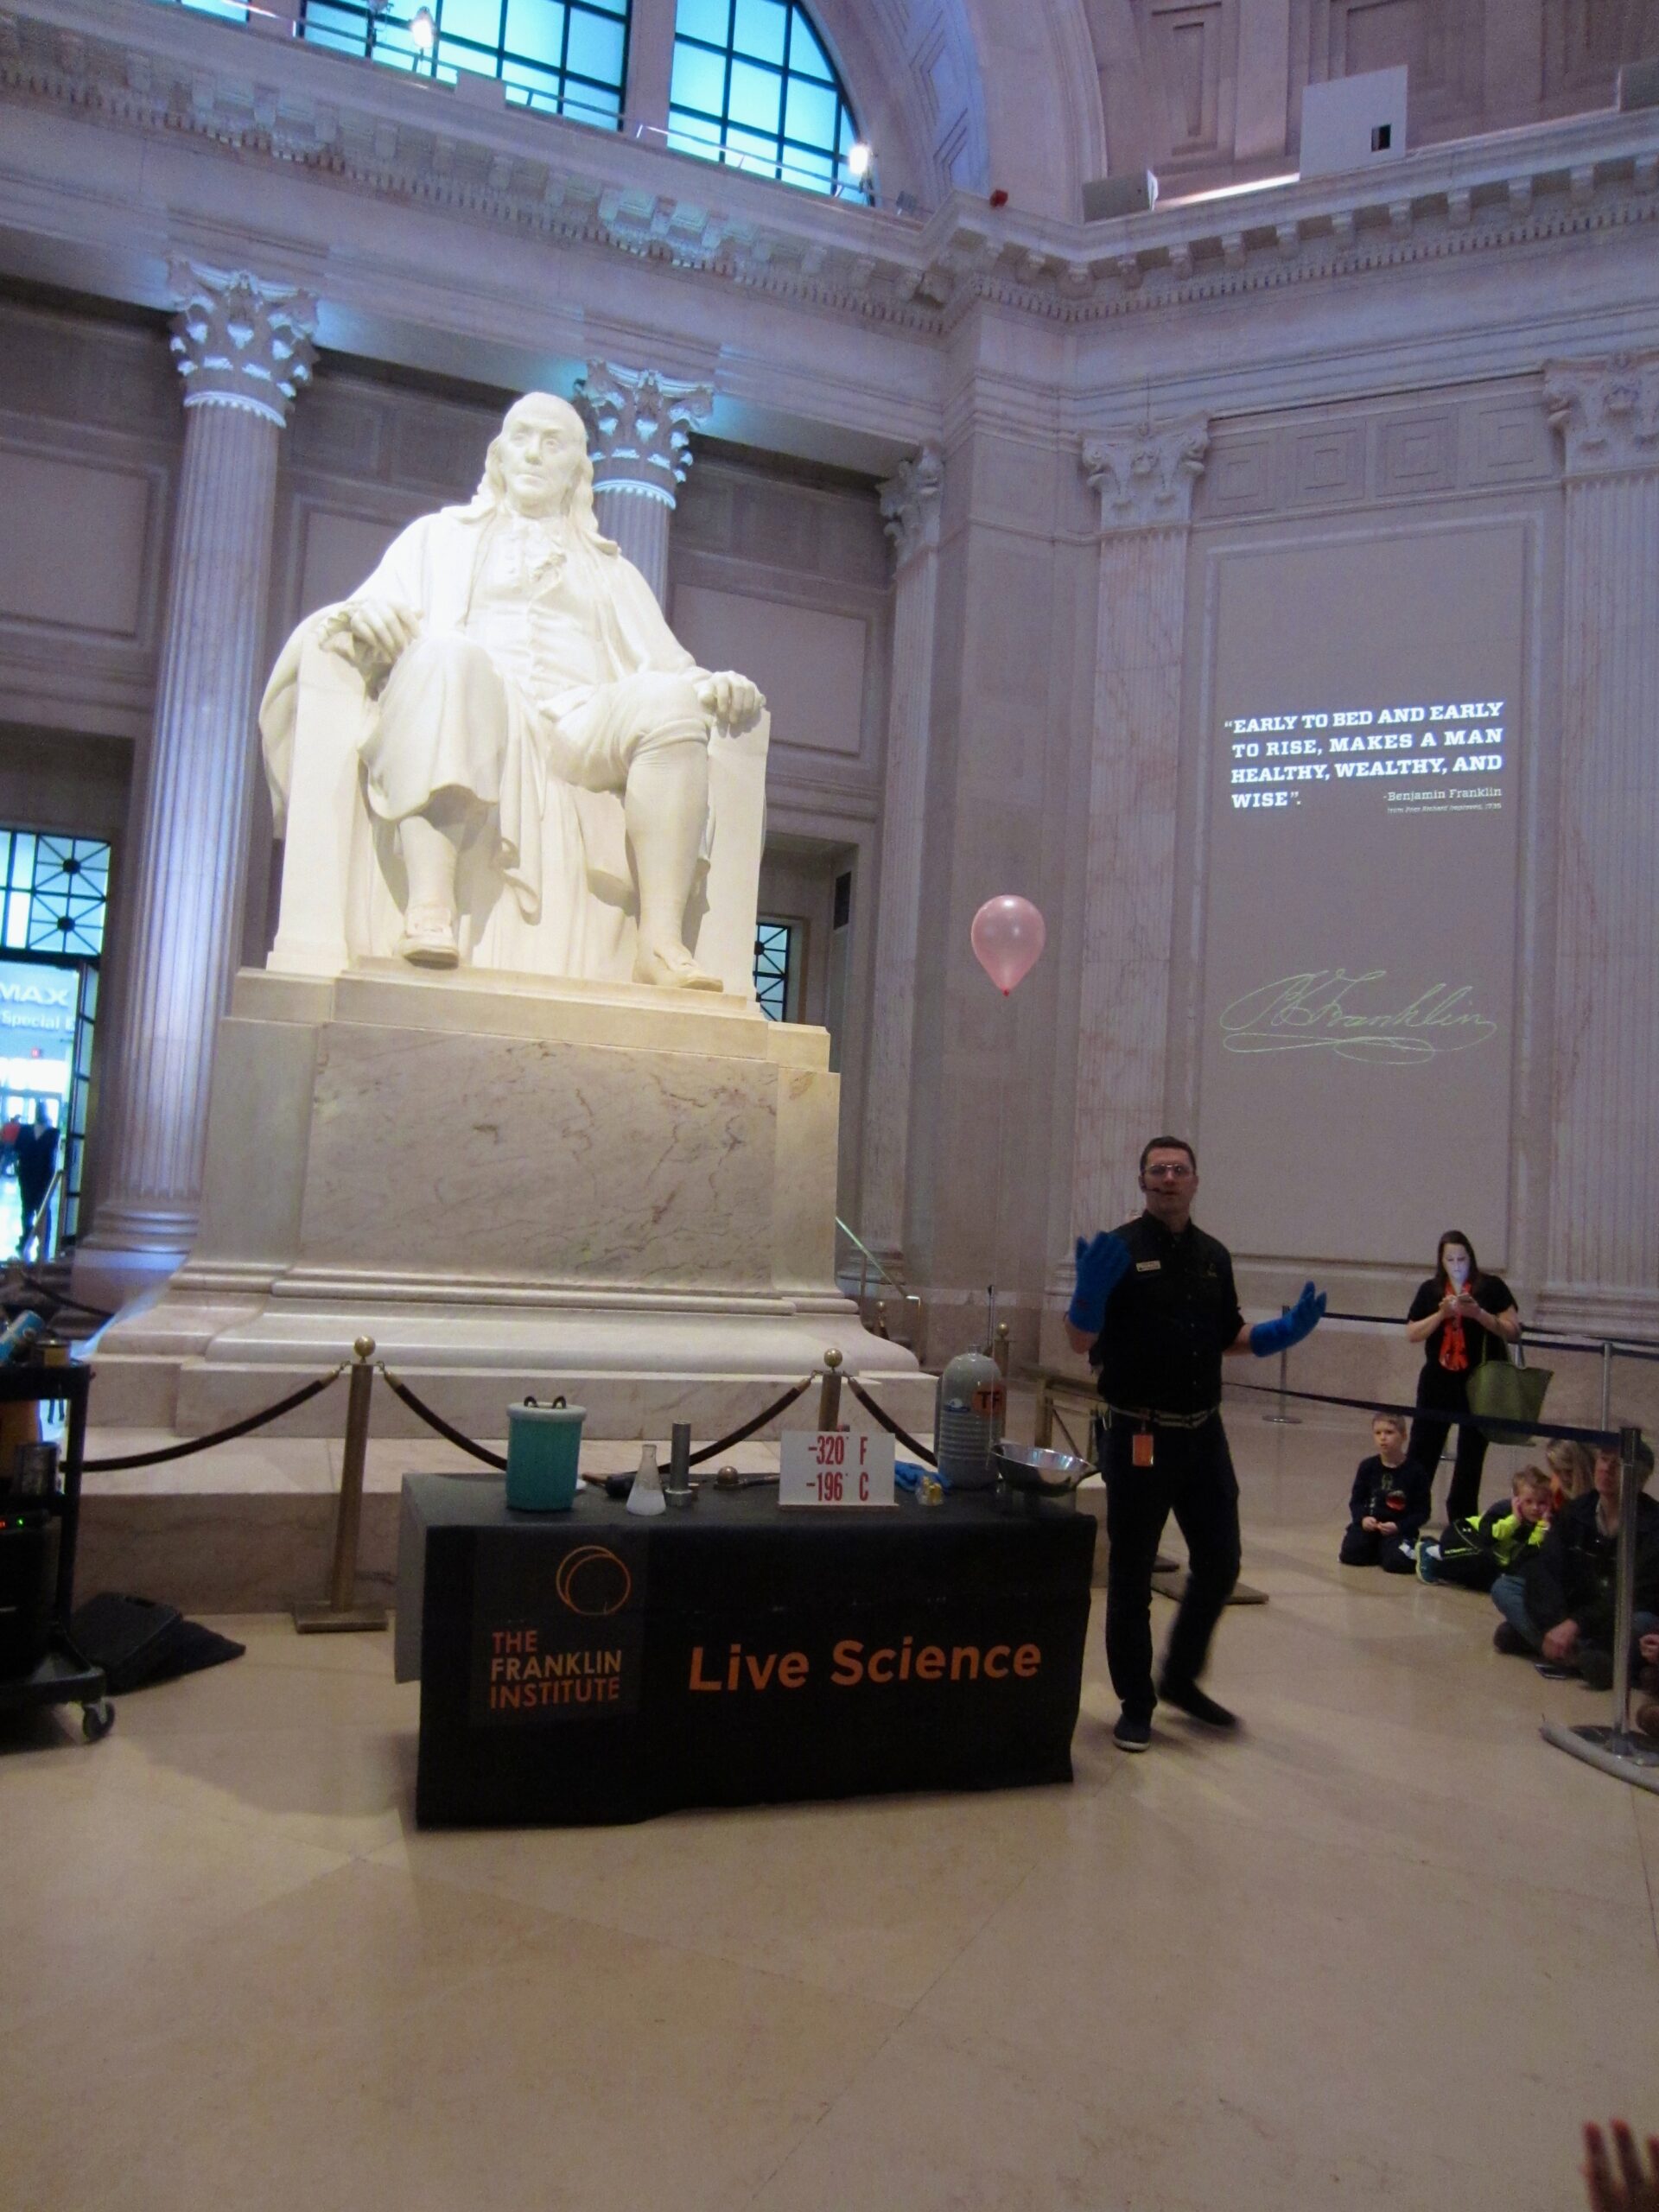 the franklin institute in philadelphia is one of the many activities that attract families to philadelphia over and over again.